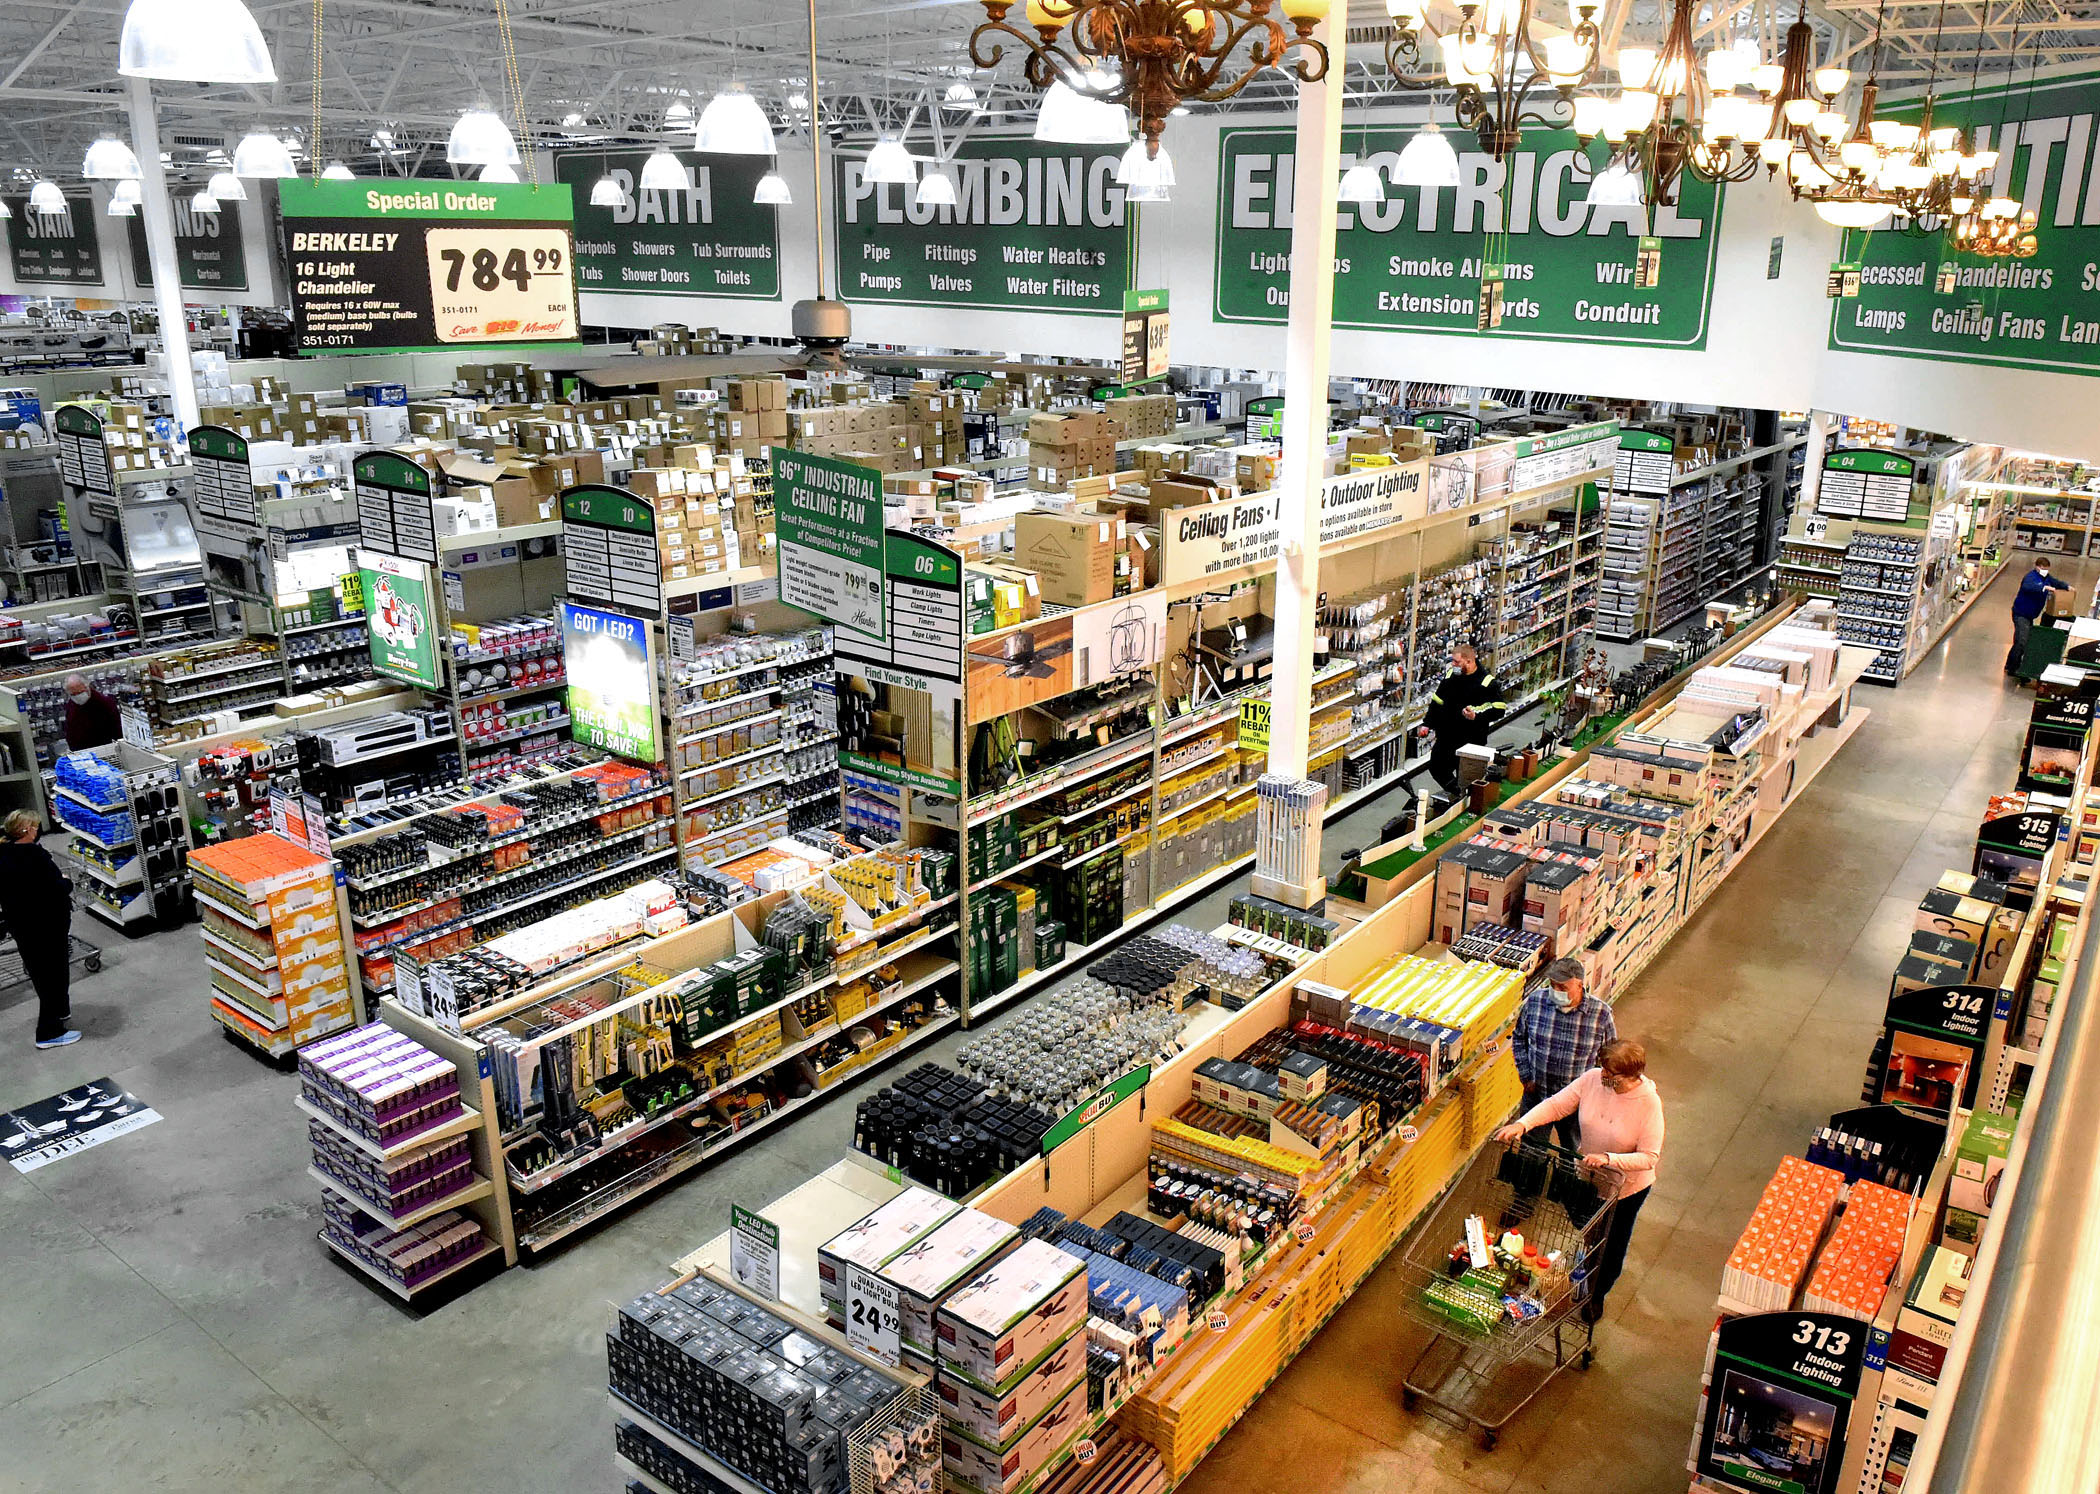 Menards first store to open at WestRidge Commons - Dominion Post